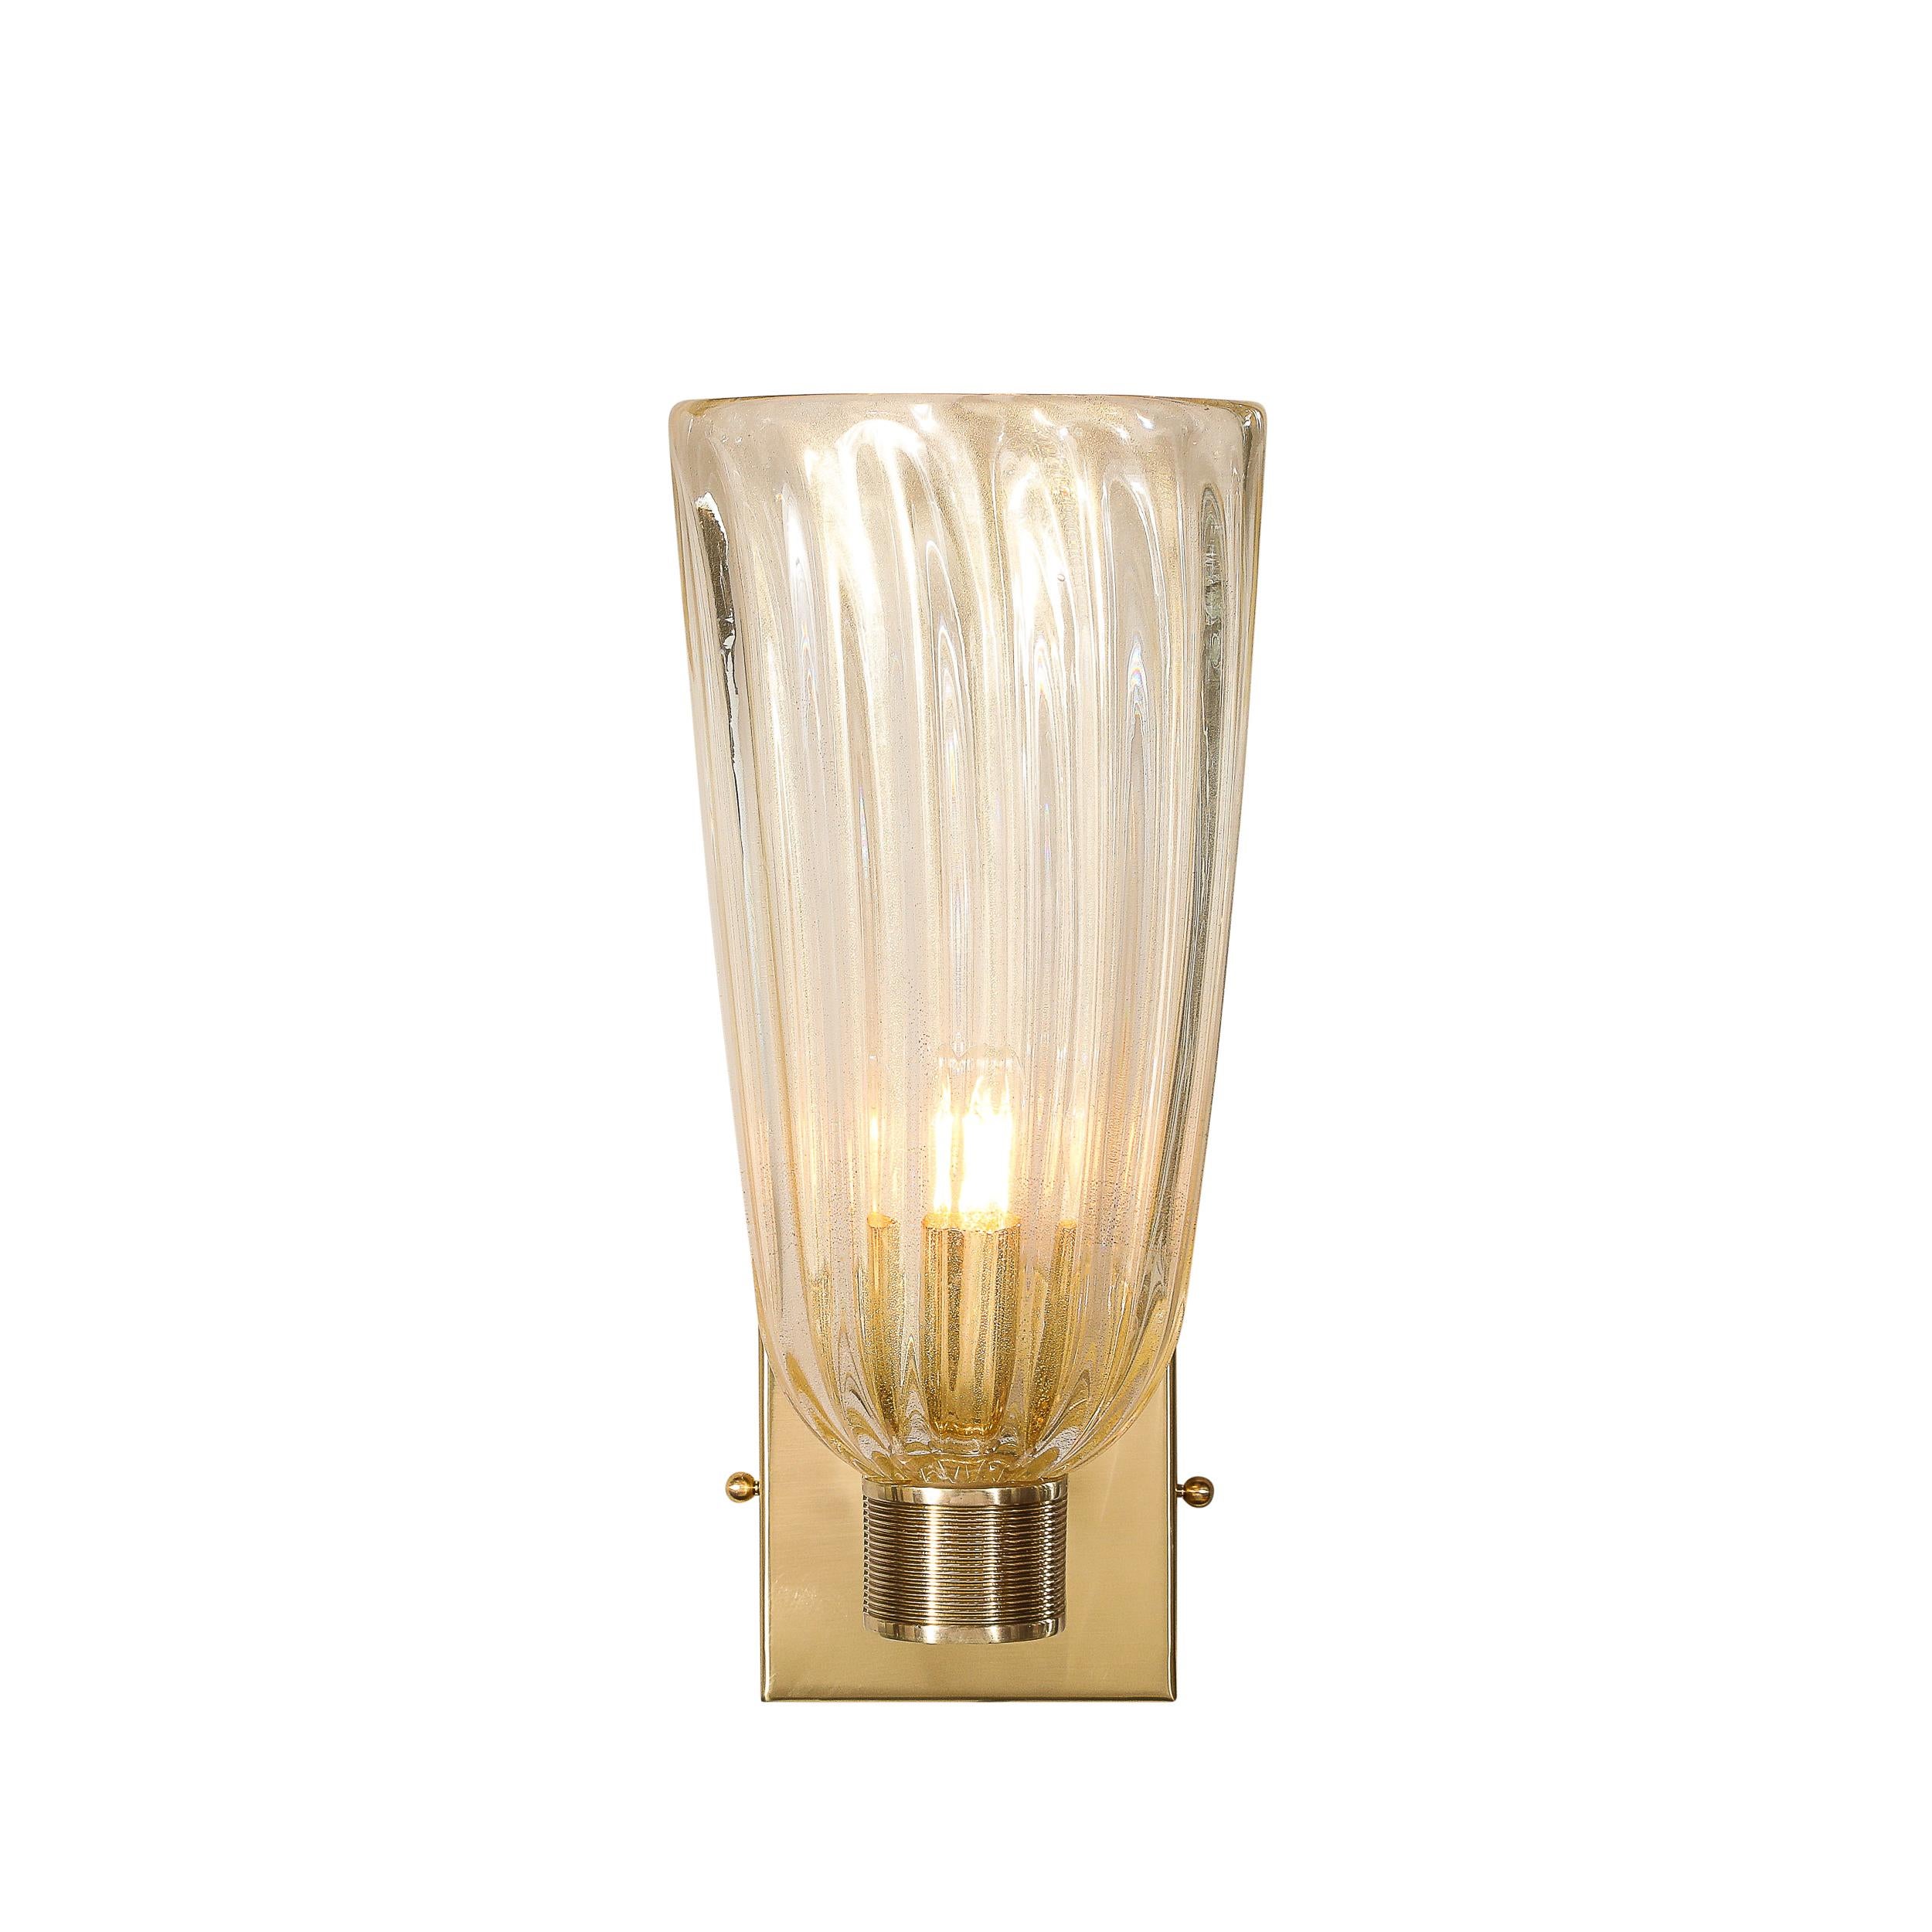 This glamorous Pair of Modernist Transparent Hand-Blown Murano Fluted Glass Sconces W/ 24kt Gold Flecks originates from Italy during the 21st Century. They feature a fluted shade rendered in transparent glass with 24kt Gold Flecks carefully